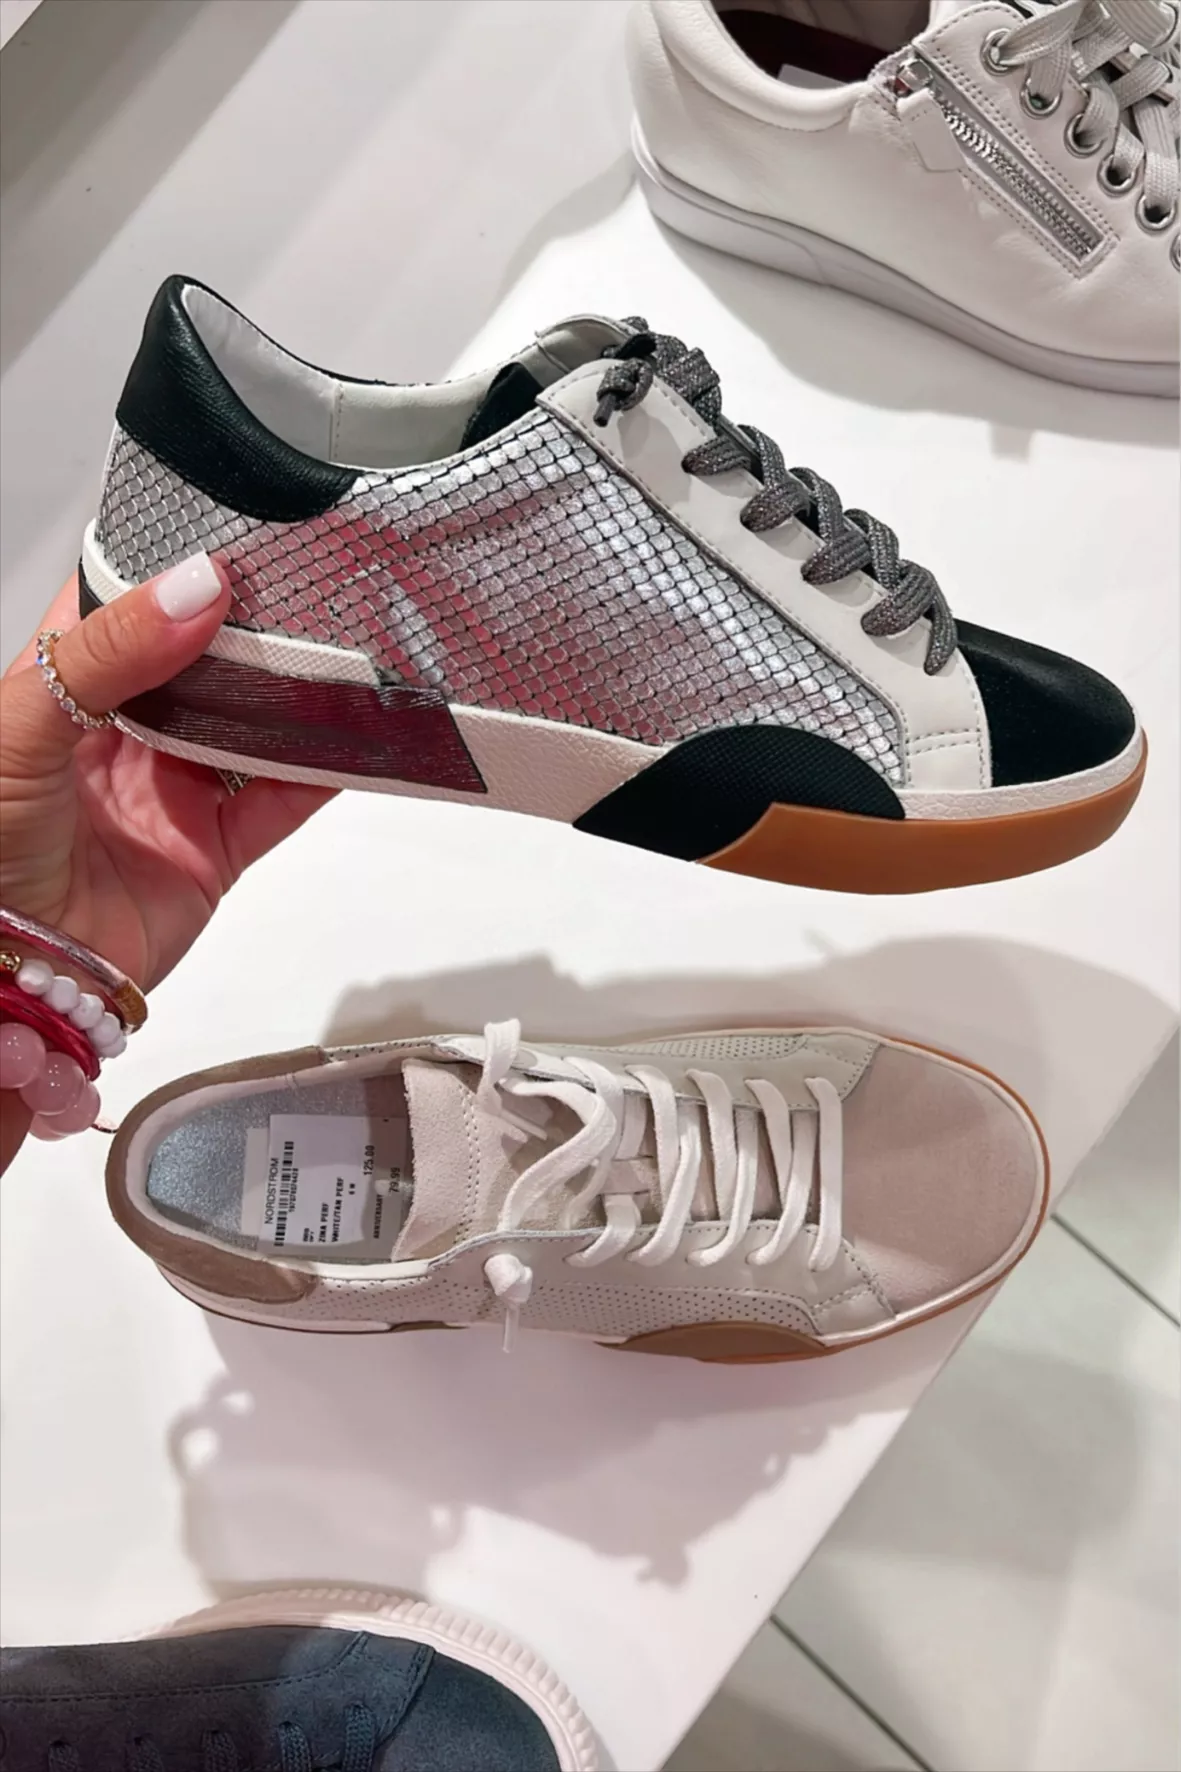 ZINA SNEAKERS WHITE GOLD LEATHER